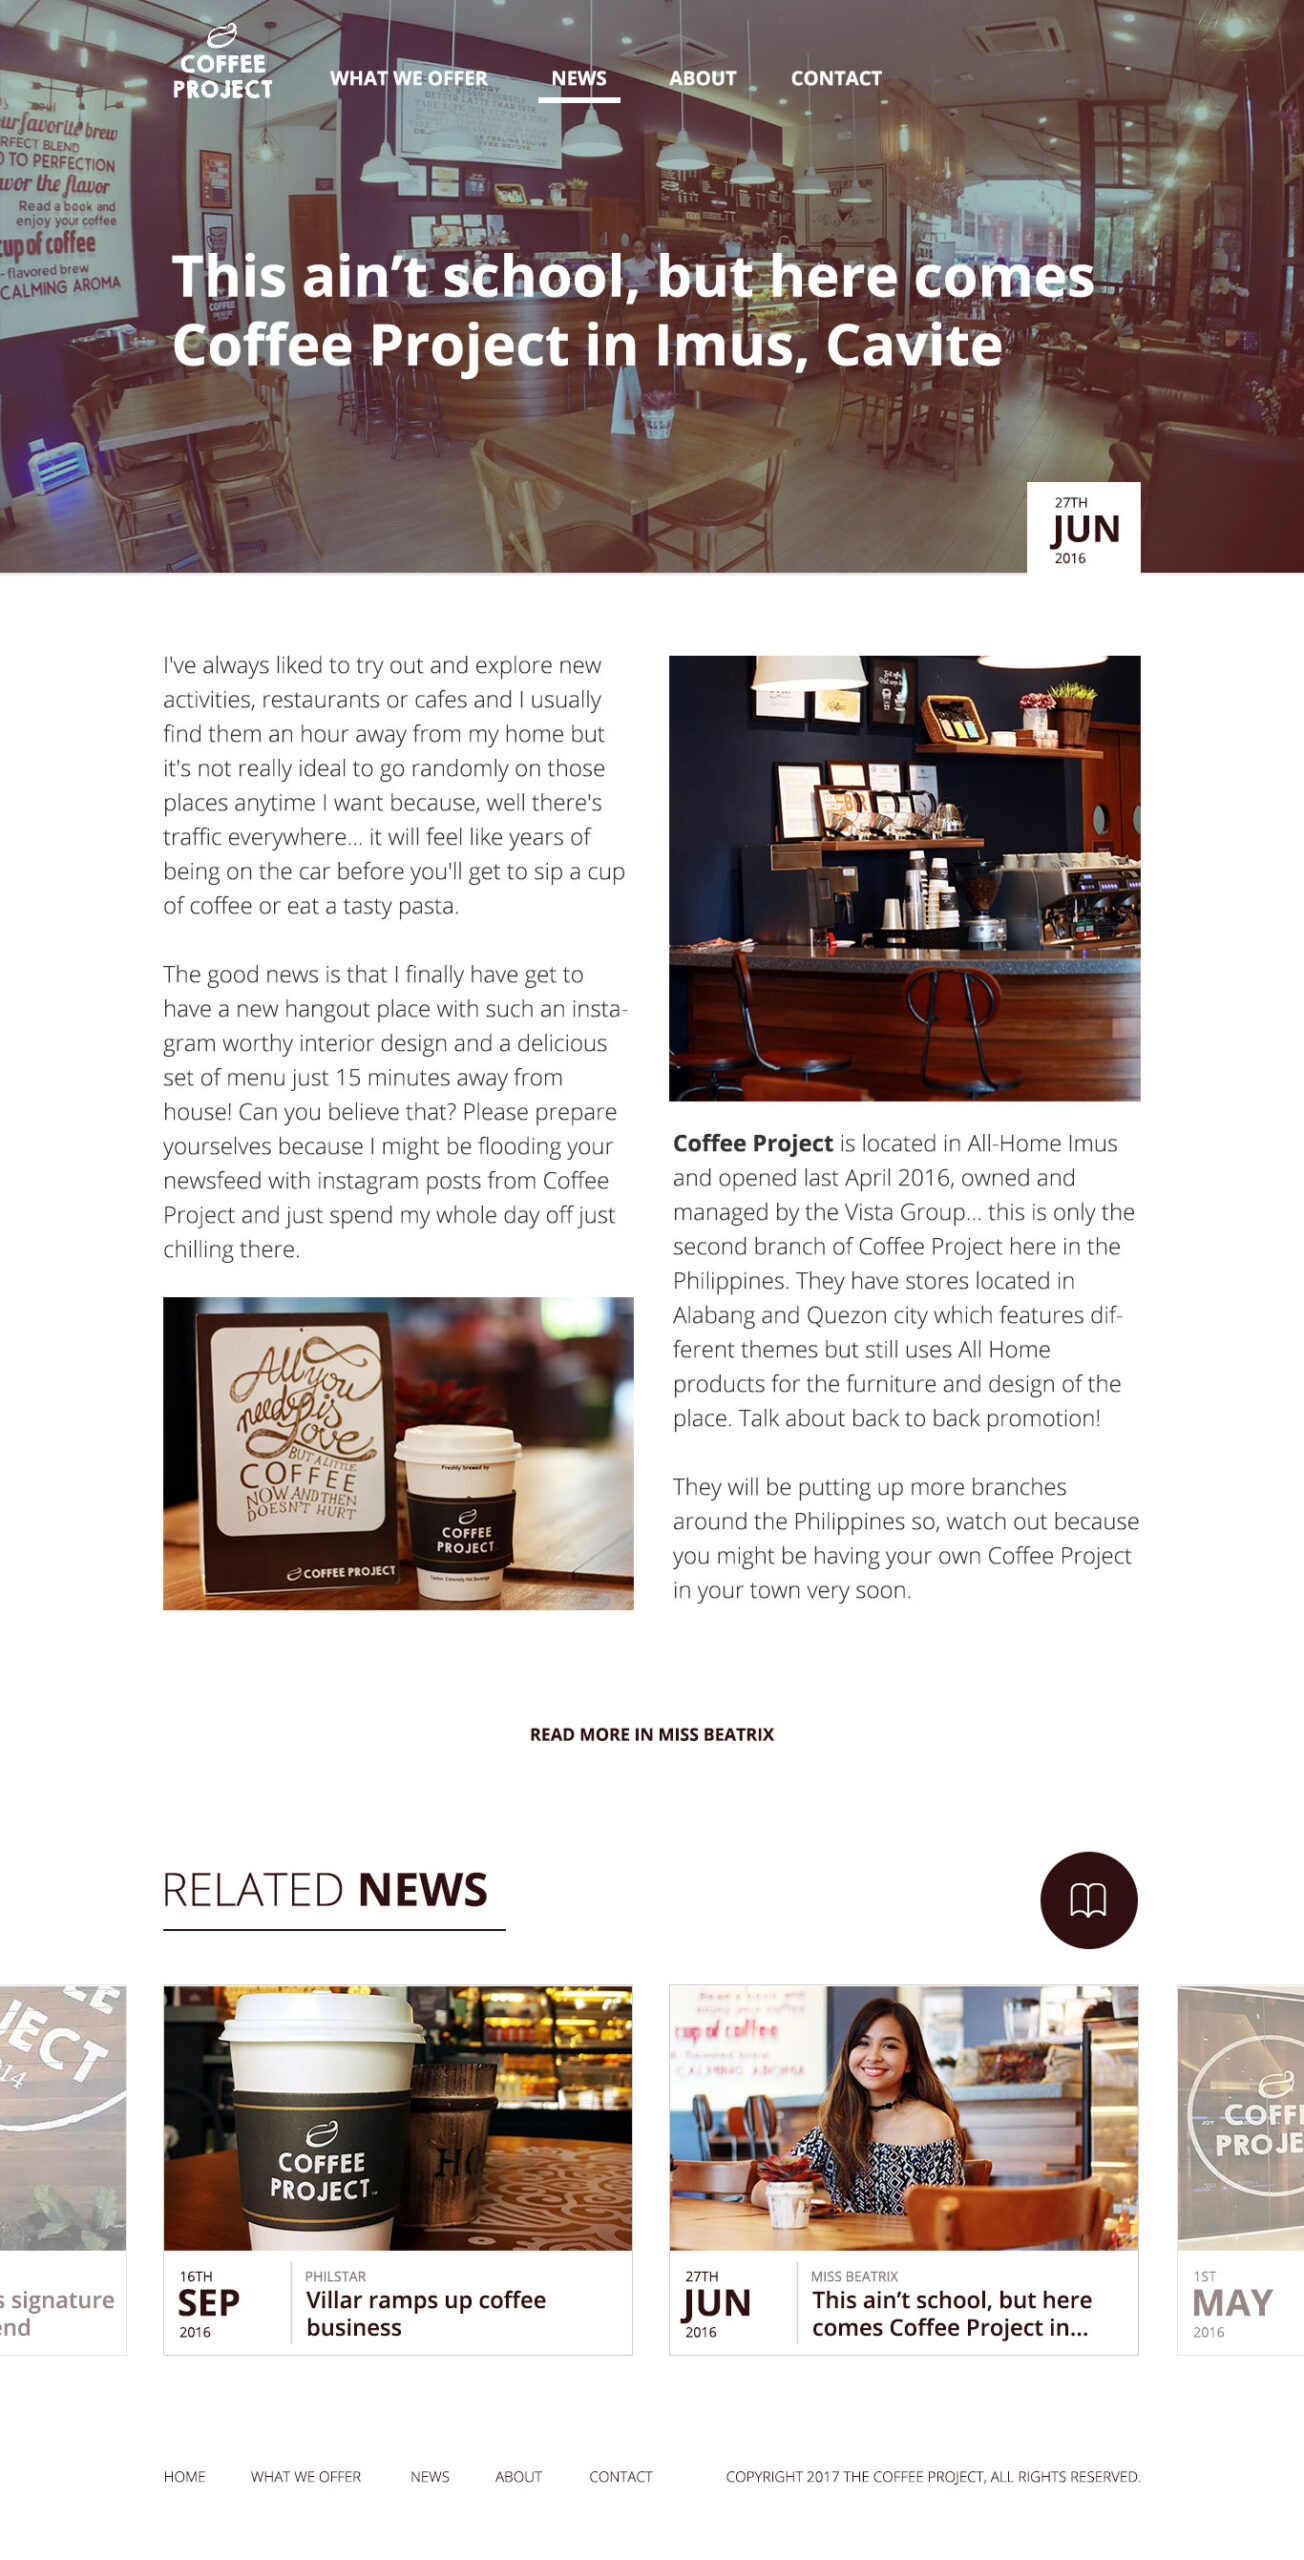 Coffee Project - News Article Page